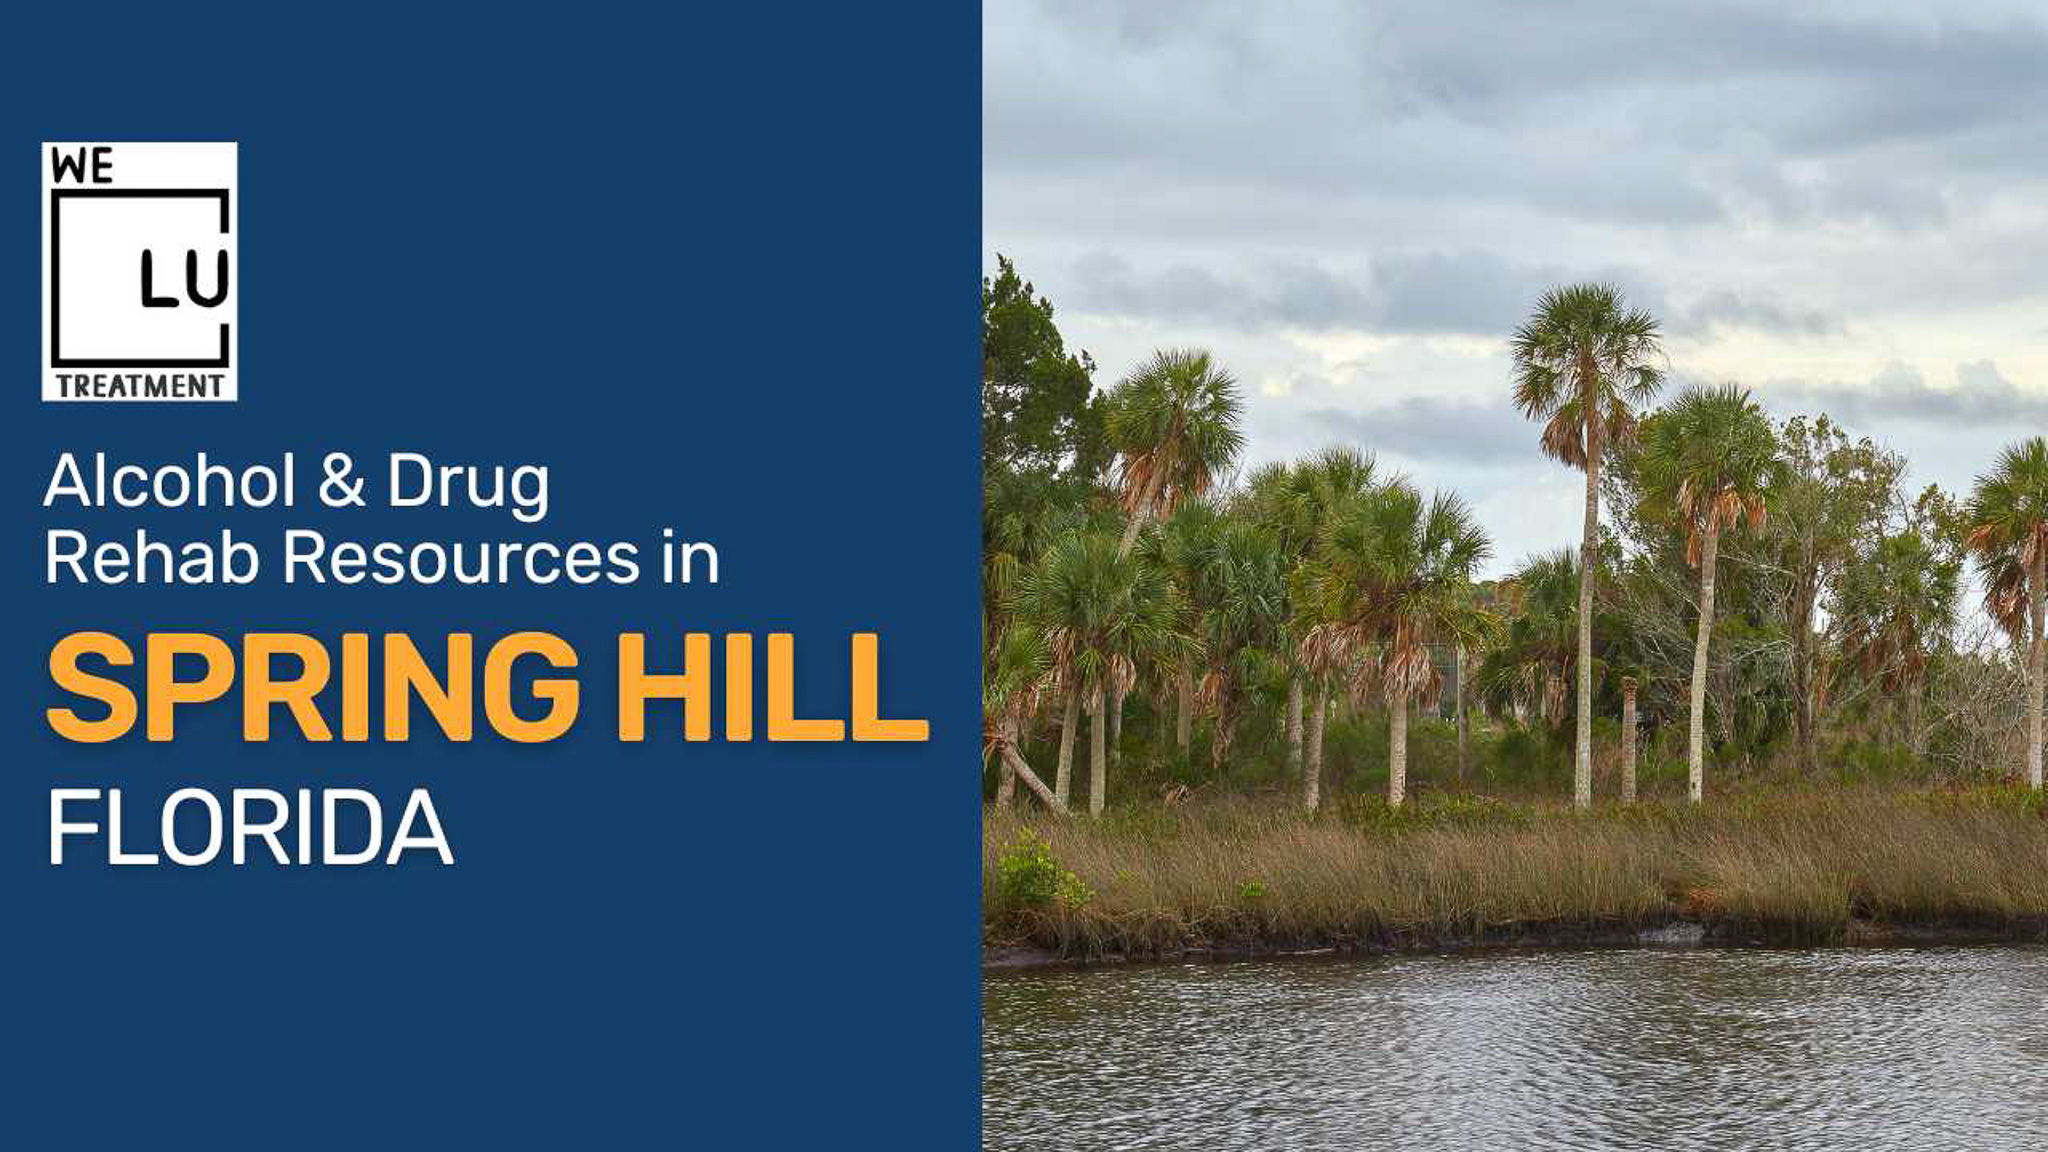 Spring Hill FL (SA) We Level Up treatment center for drug and alcohol rehab detox and mental health services - Image 1